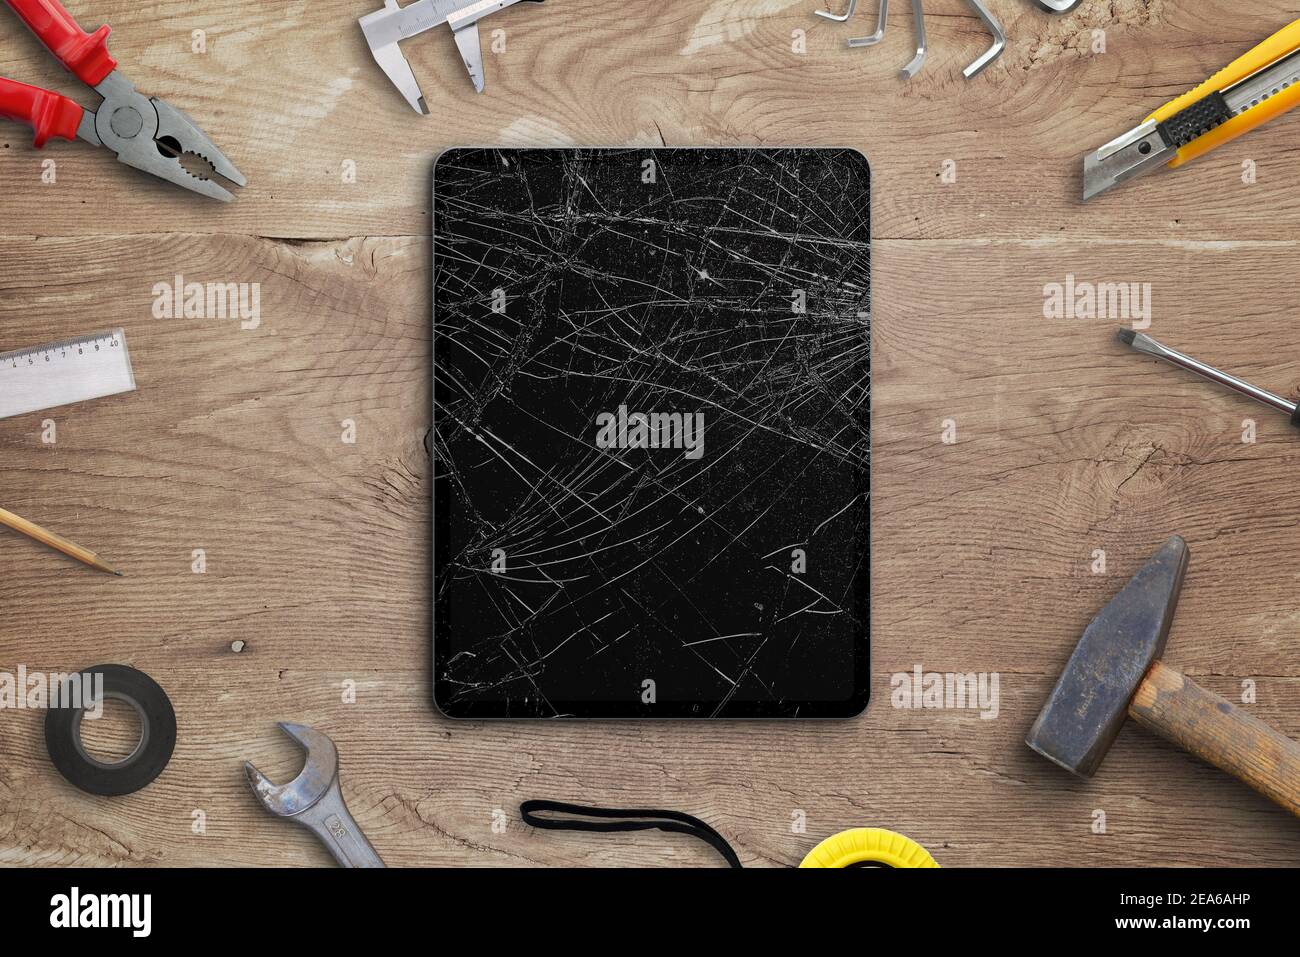 Repair broken tablet concept. Tablet with smashed disolay on work desk with tools beside. Top view, flat lay composition Stock Photo